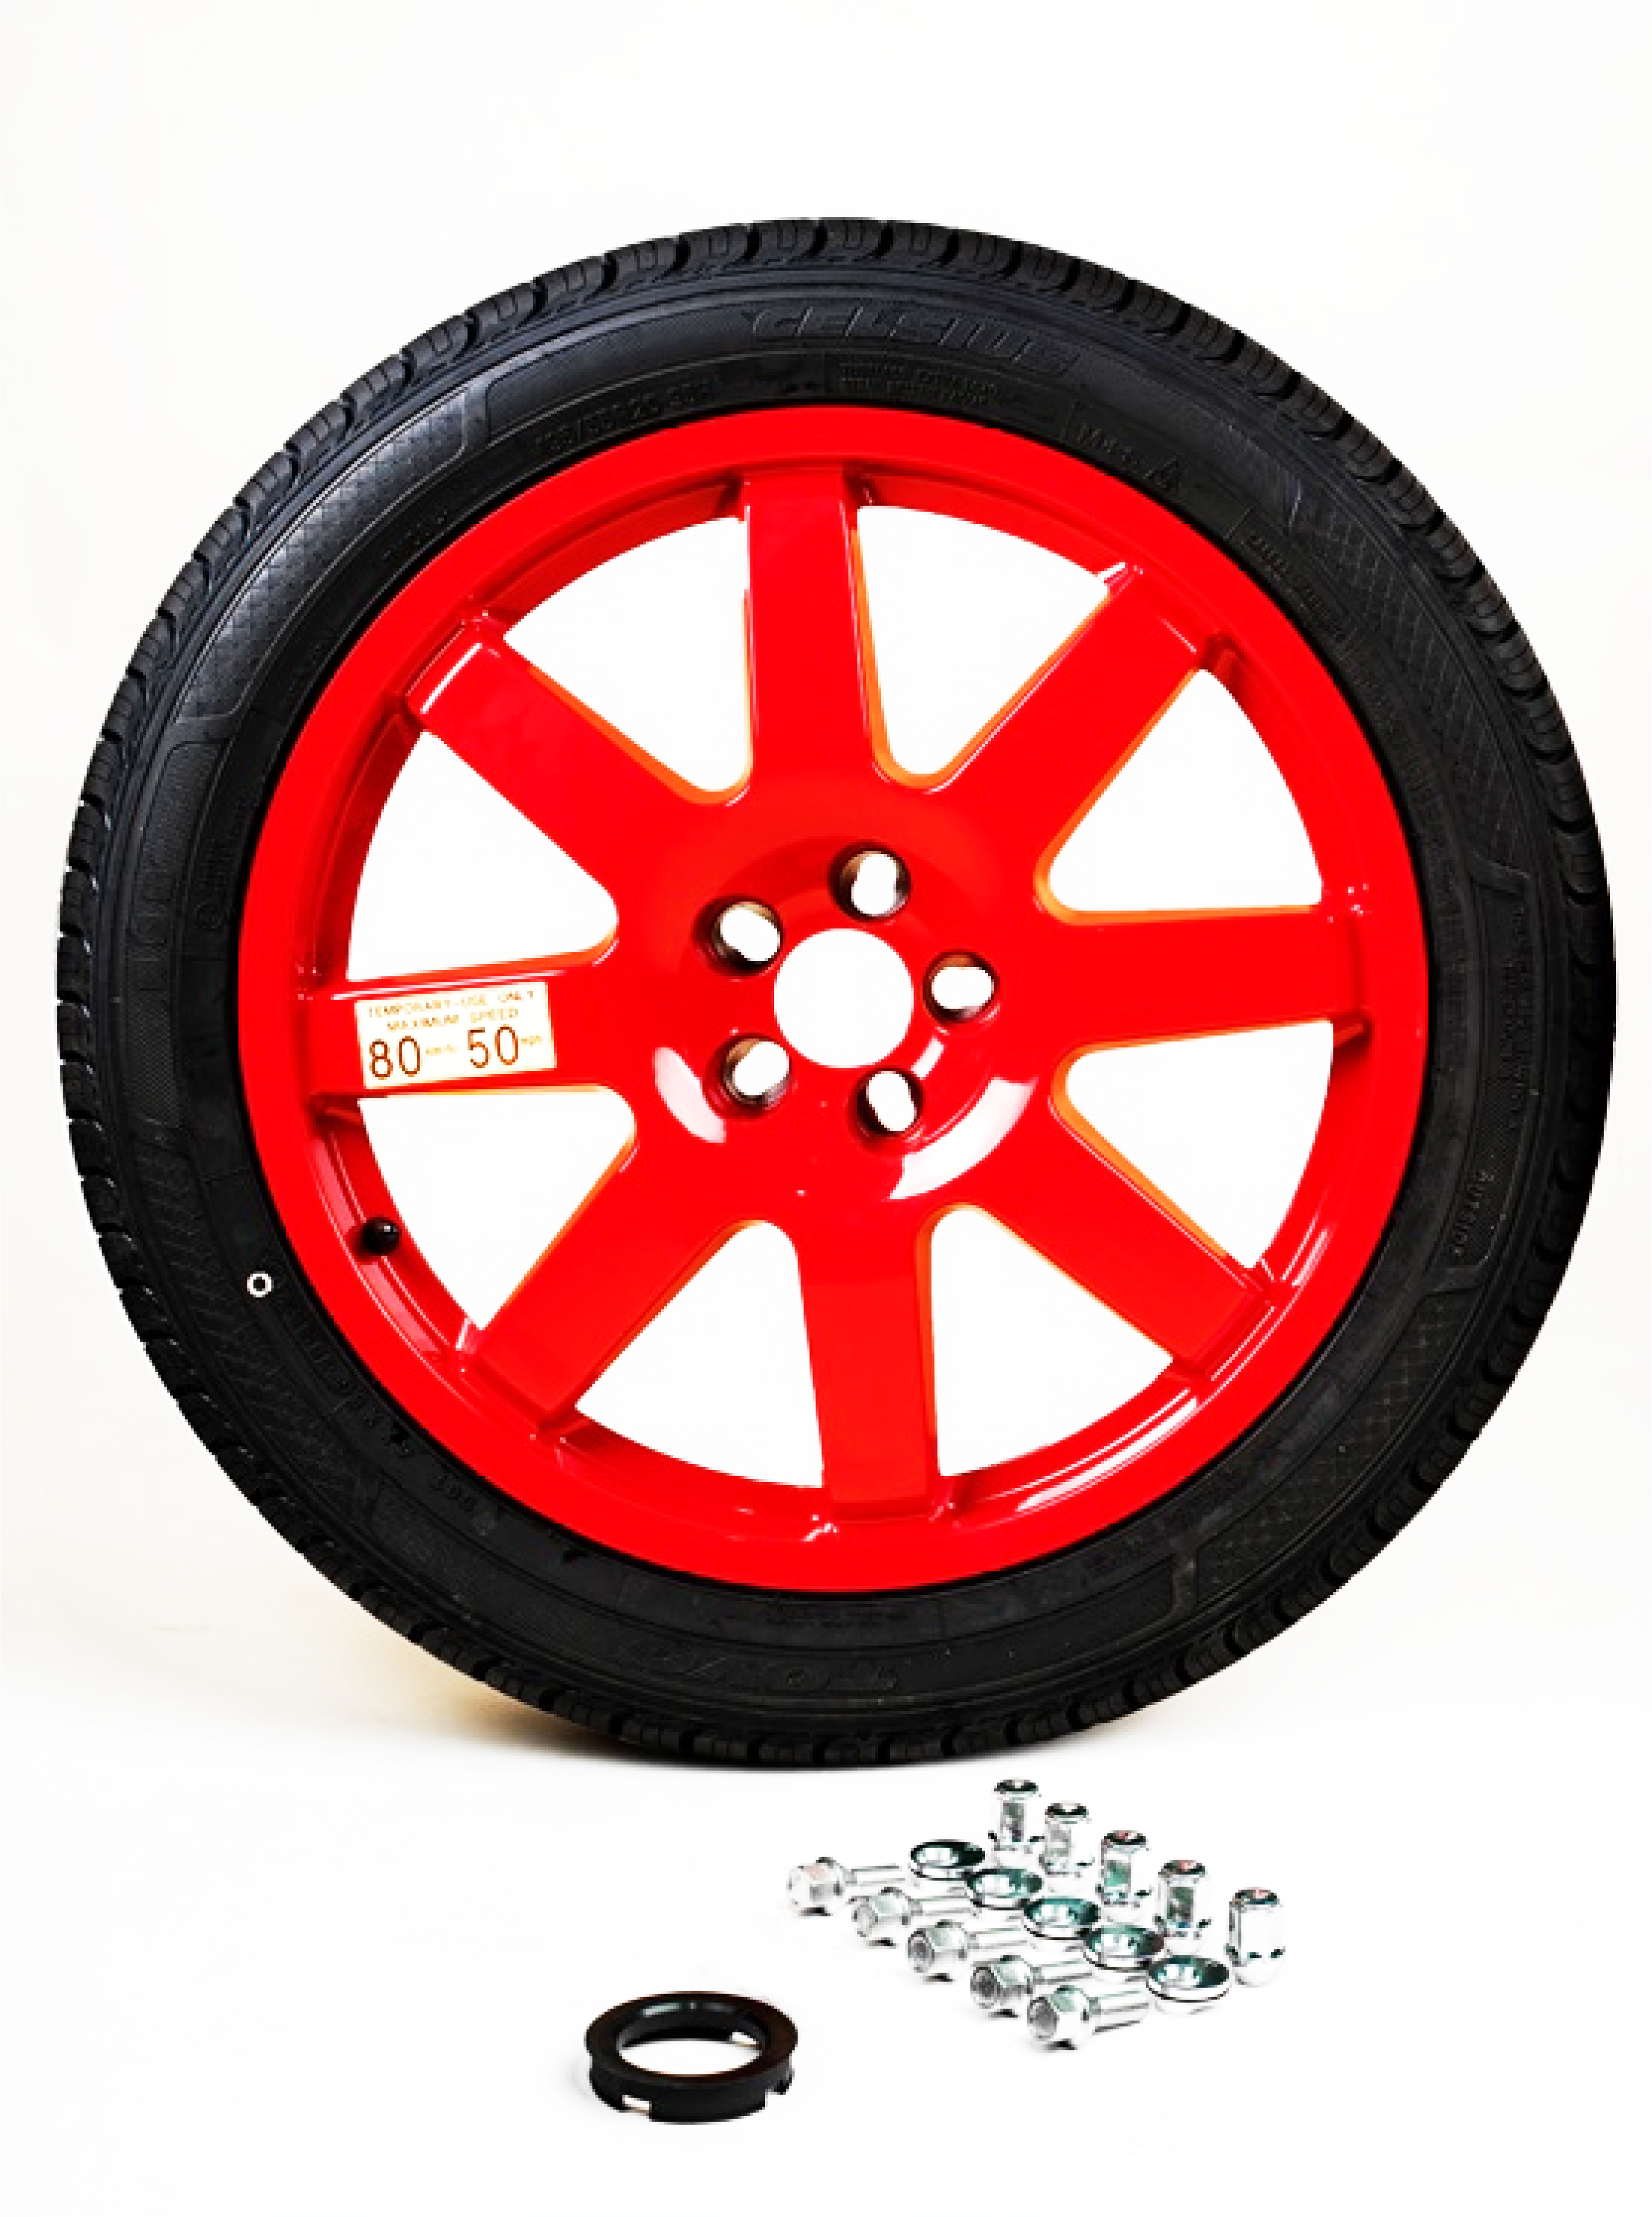 WE HAVE ALLOY SPARE WHEELS THAT FIT VEHICLES WITH 16” UP TO 22” WHEELS